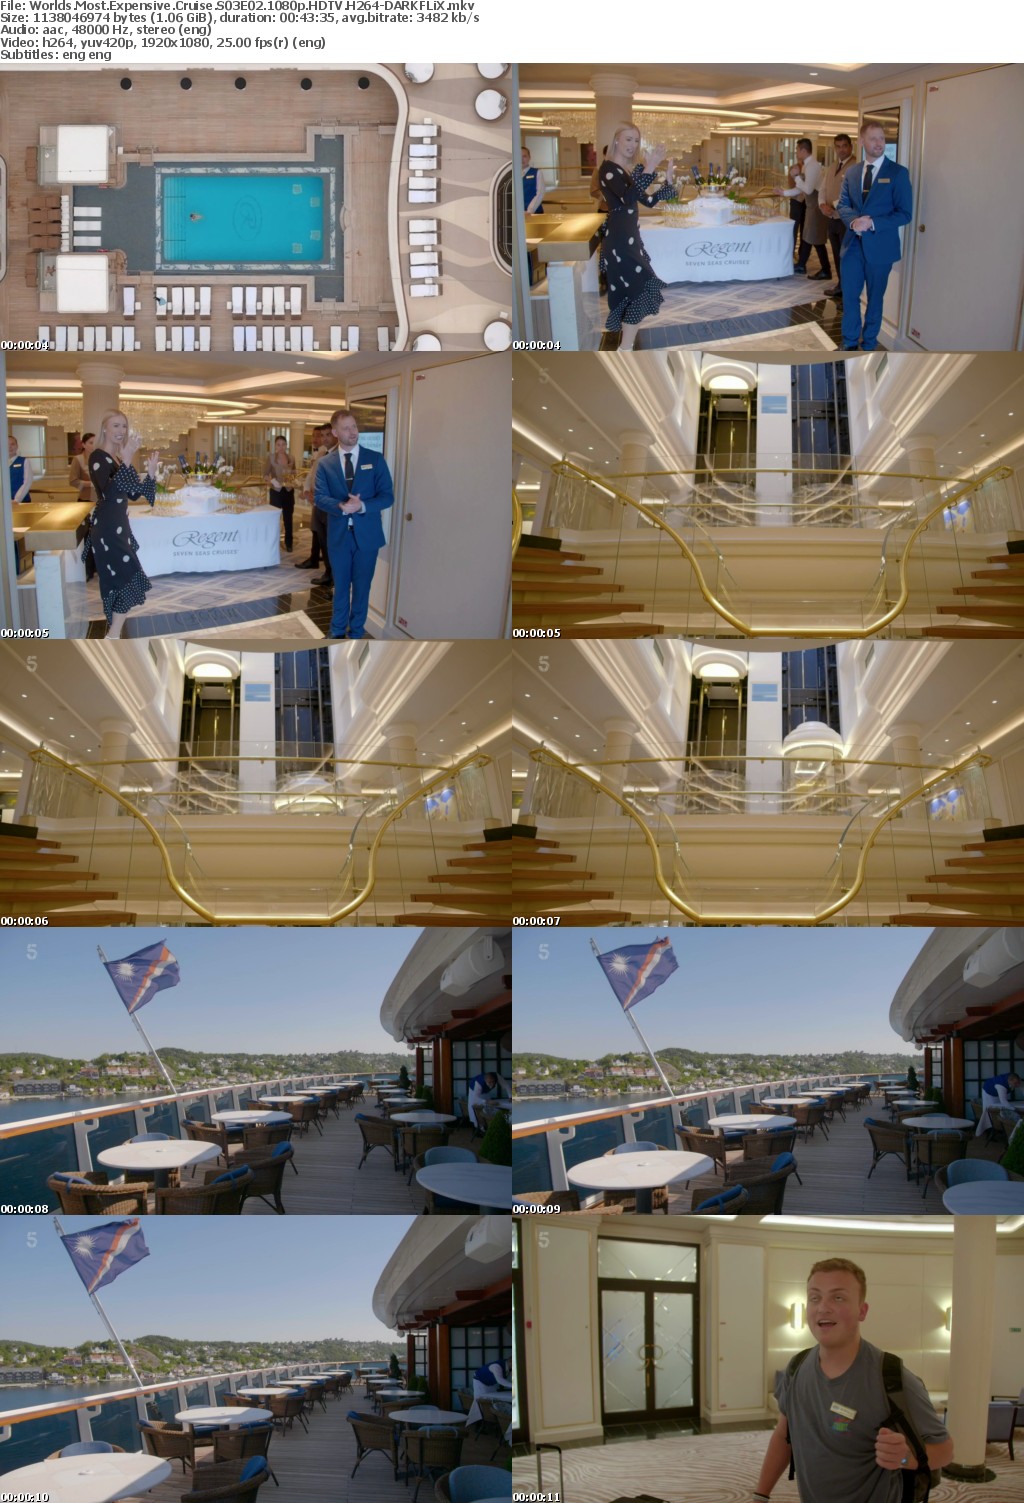 Worlds Most Expensive Cruise S03E02 1080p HDTV H264-DARKFLiX